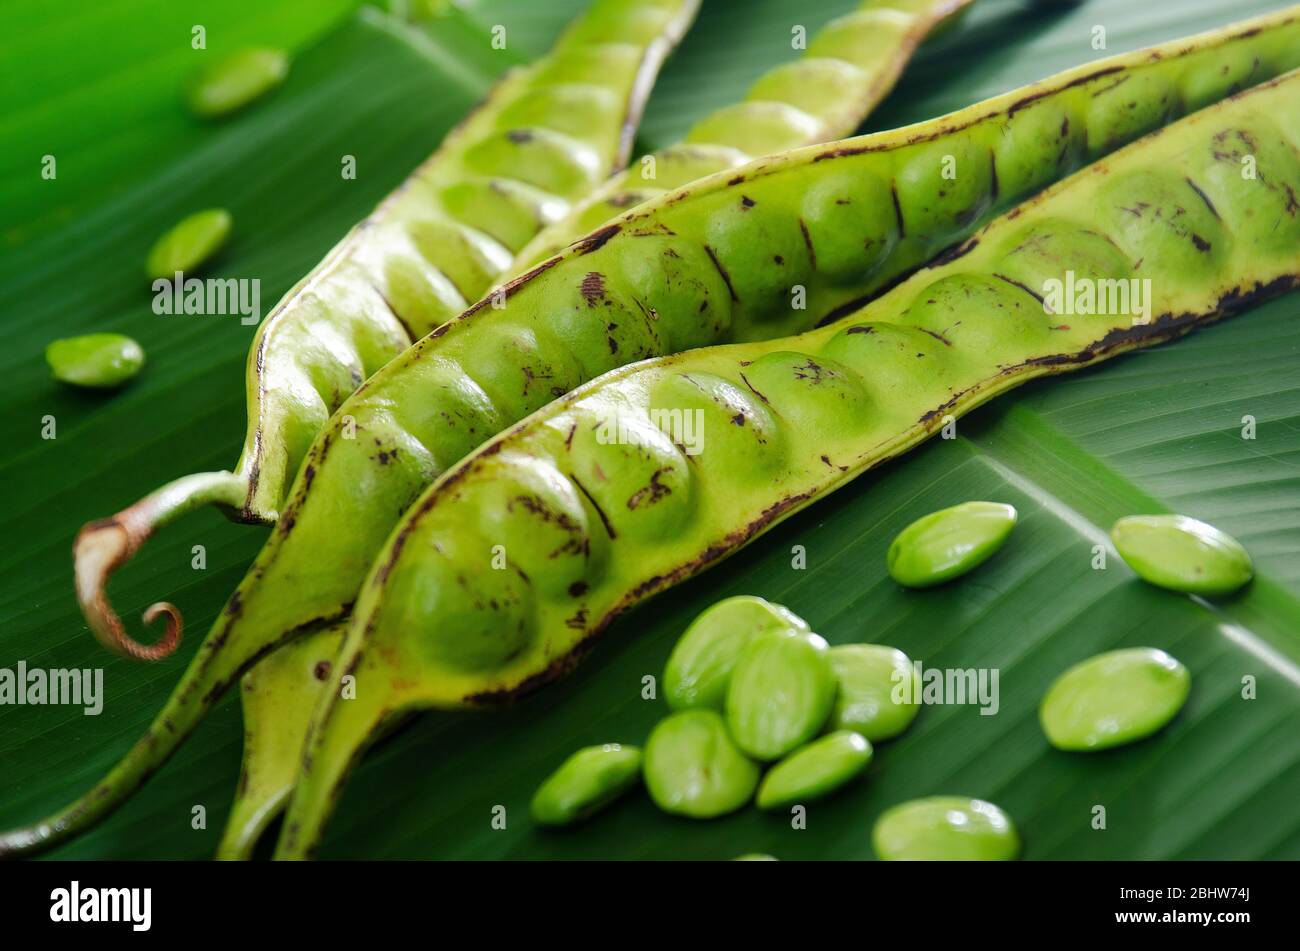 Parkia speciosa ( petai, bitter bean, twisted cluster bean, stinker or stink bean) on green banana leaf background Stock Photo